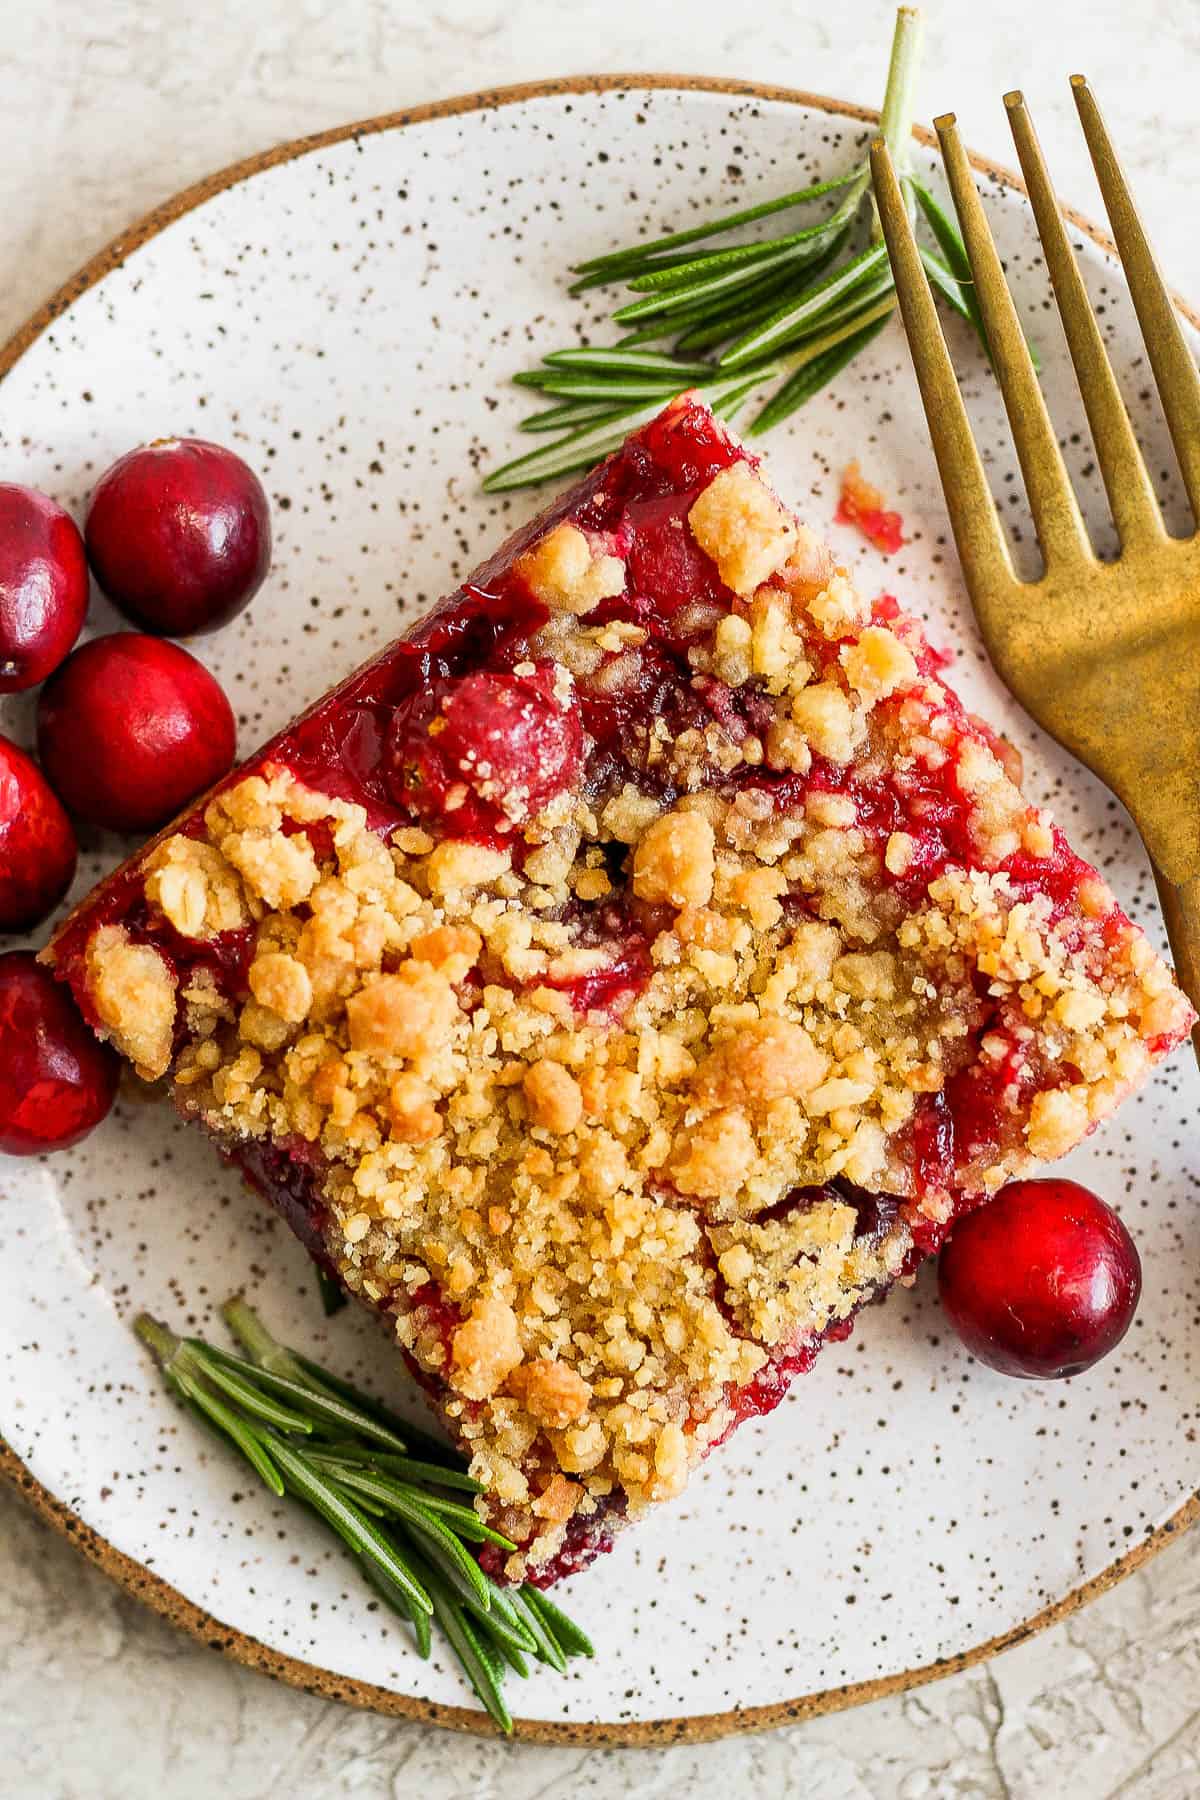 A cranberry bar on a plate alongside a fork, fresh rosemary, and fresh cranberries.